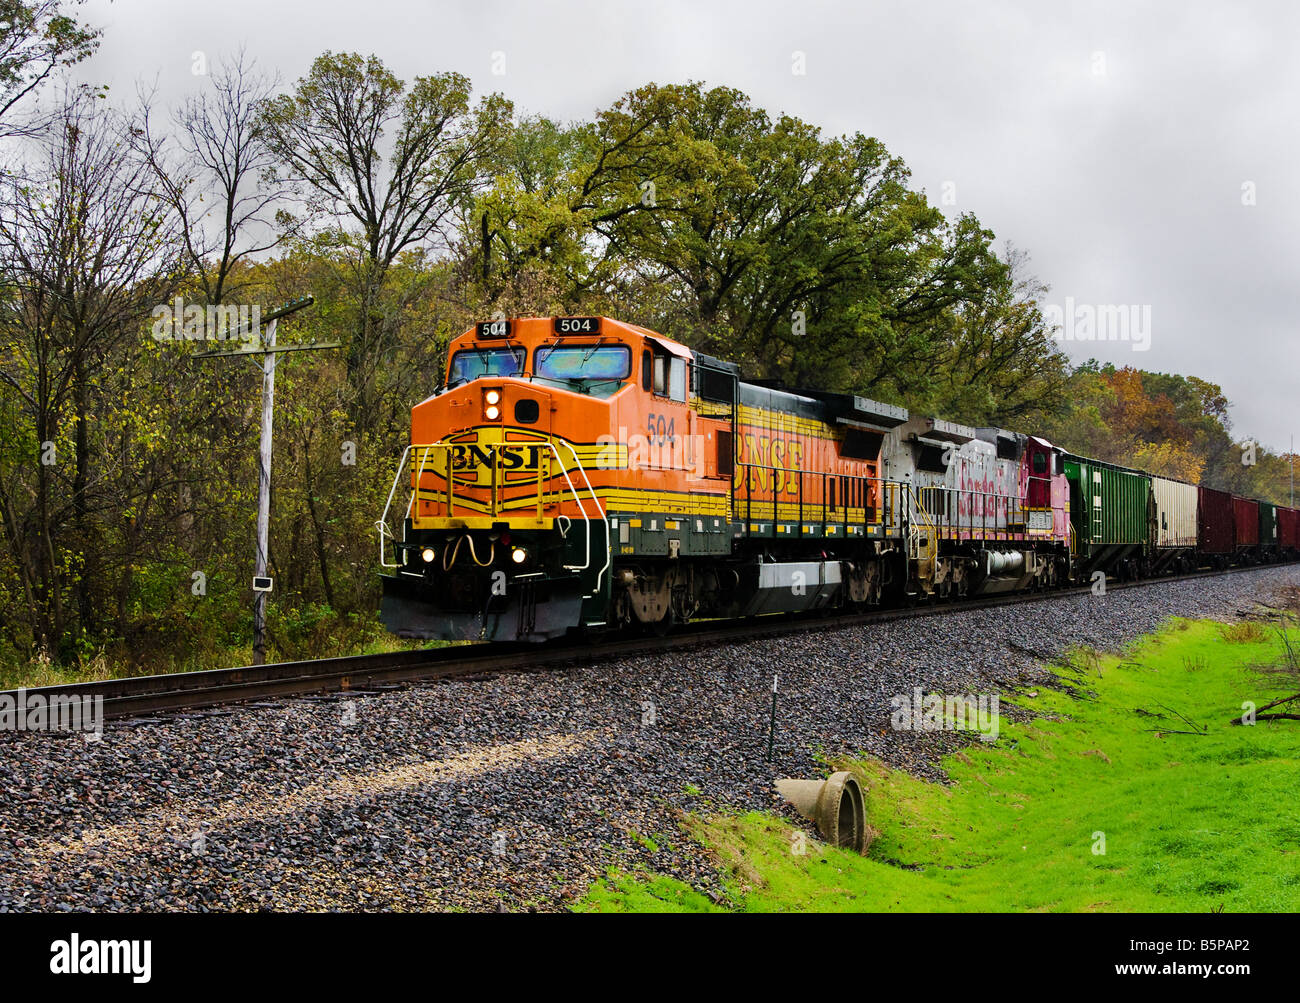 BNSF diesel locomotive pulls a load of cars towards Colona, IL. Stock Photo